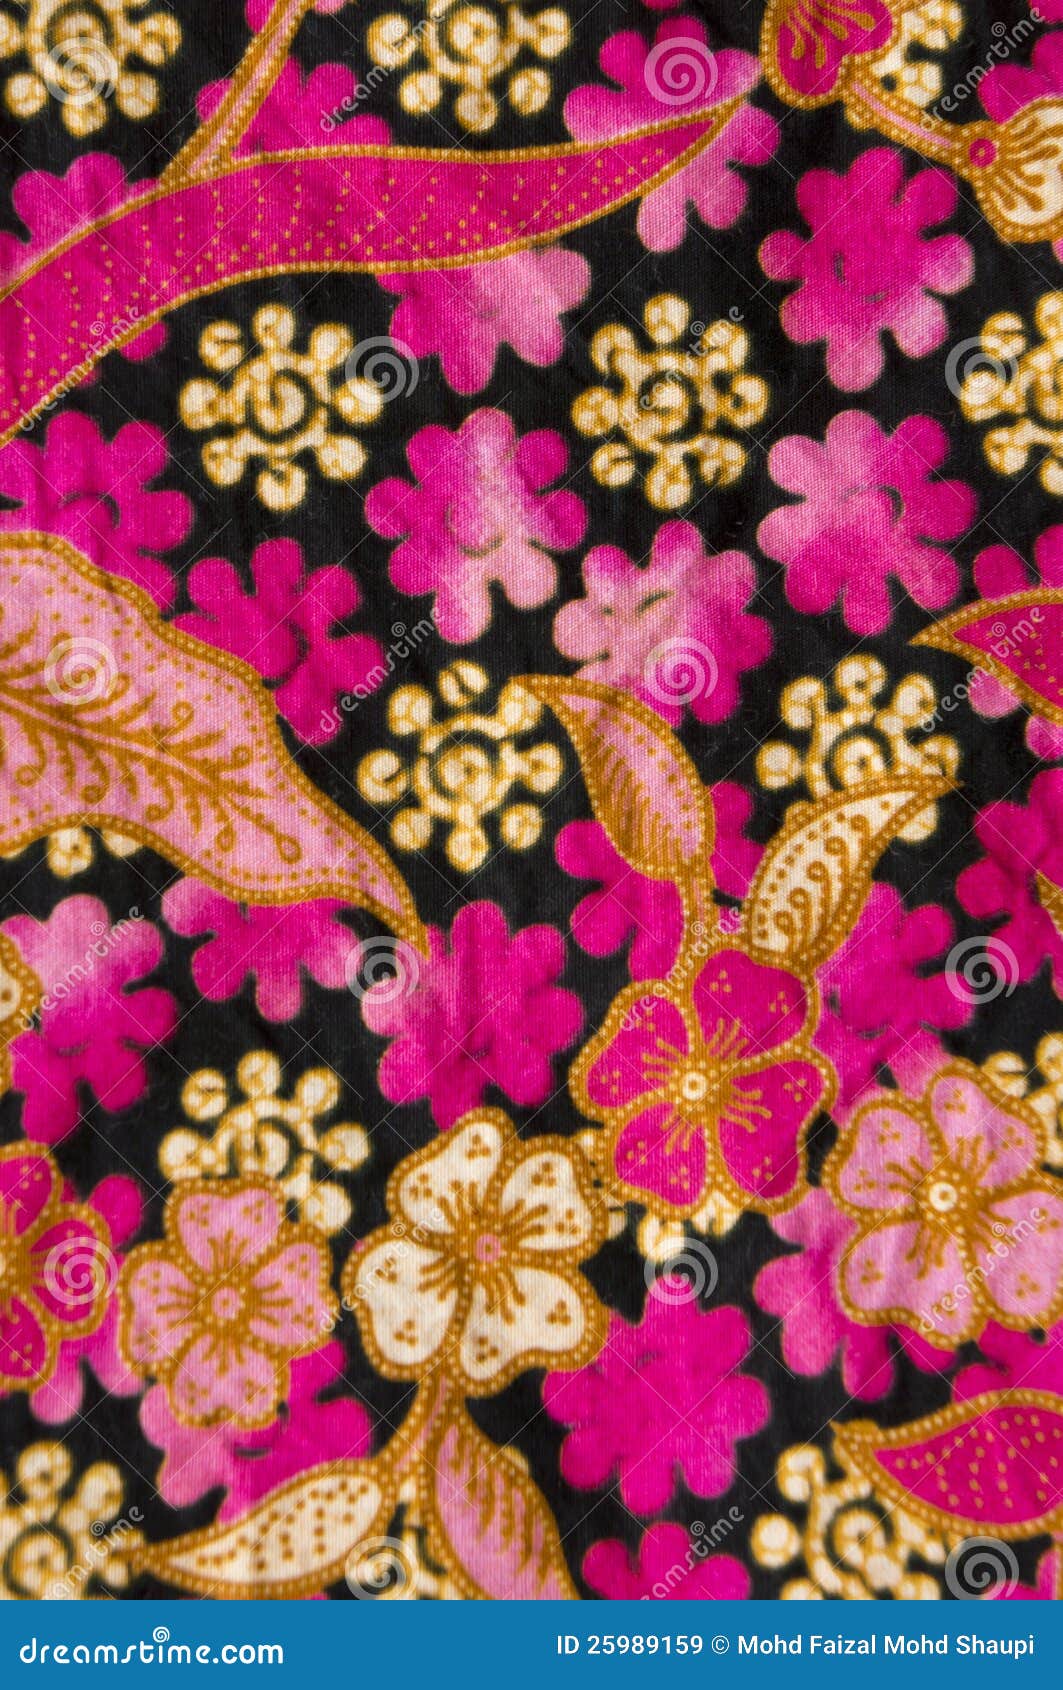 Batik With Floral Patterns Royalty Free Stock Images 